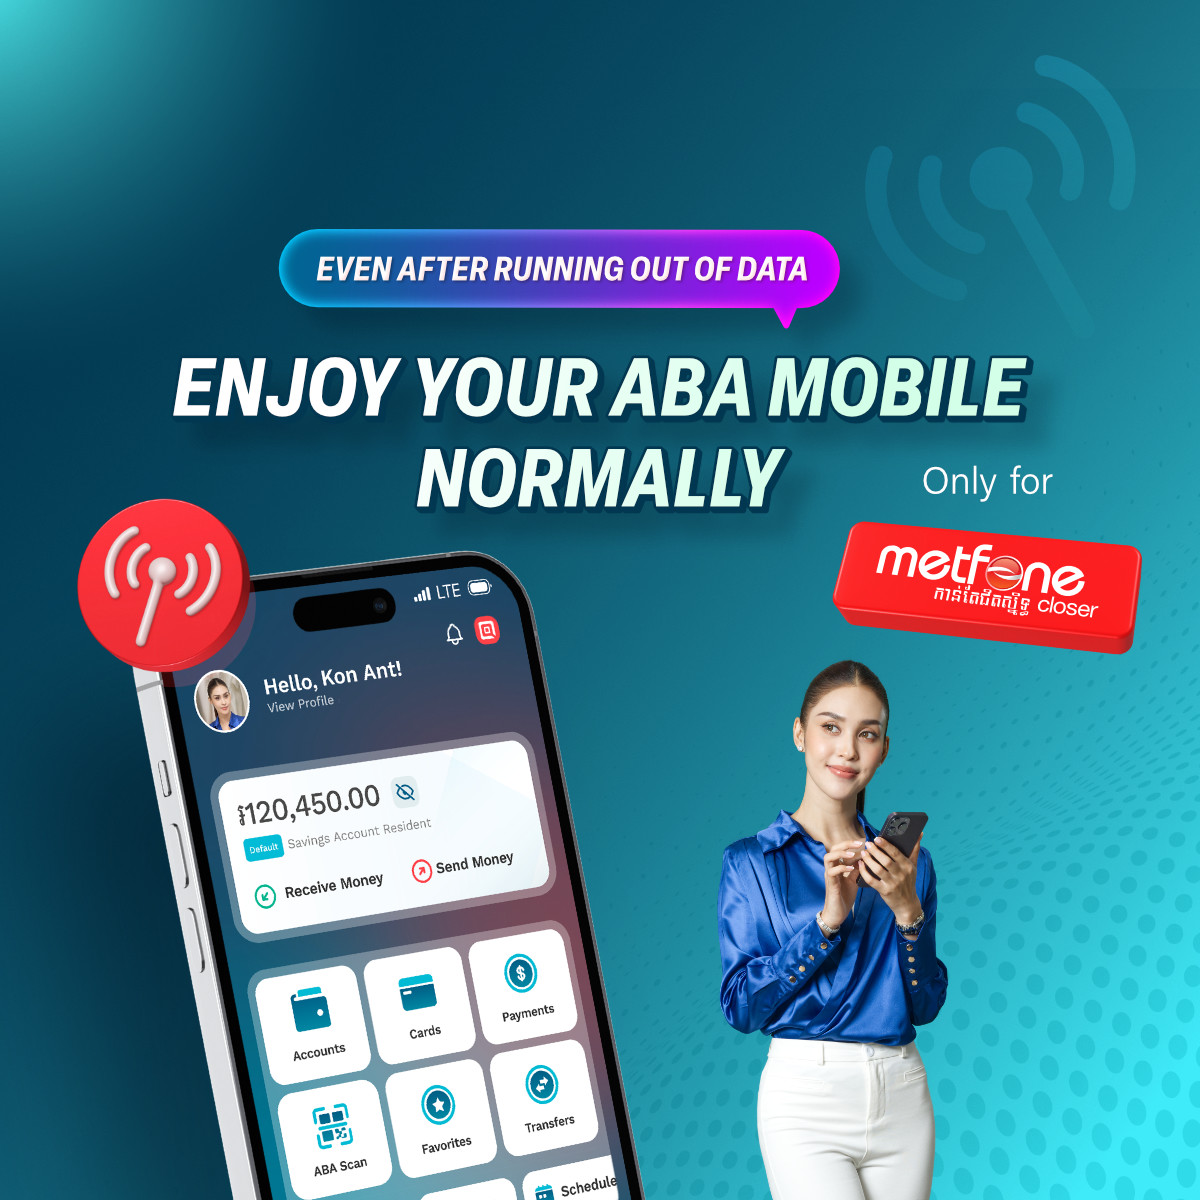 ABA​ Mobile​ offers​ data-saving​ advantage​ to​ Metfone​ users